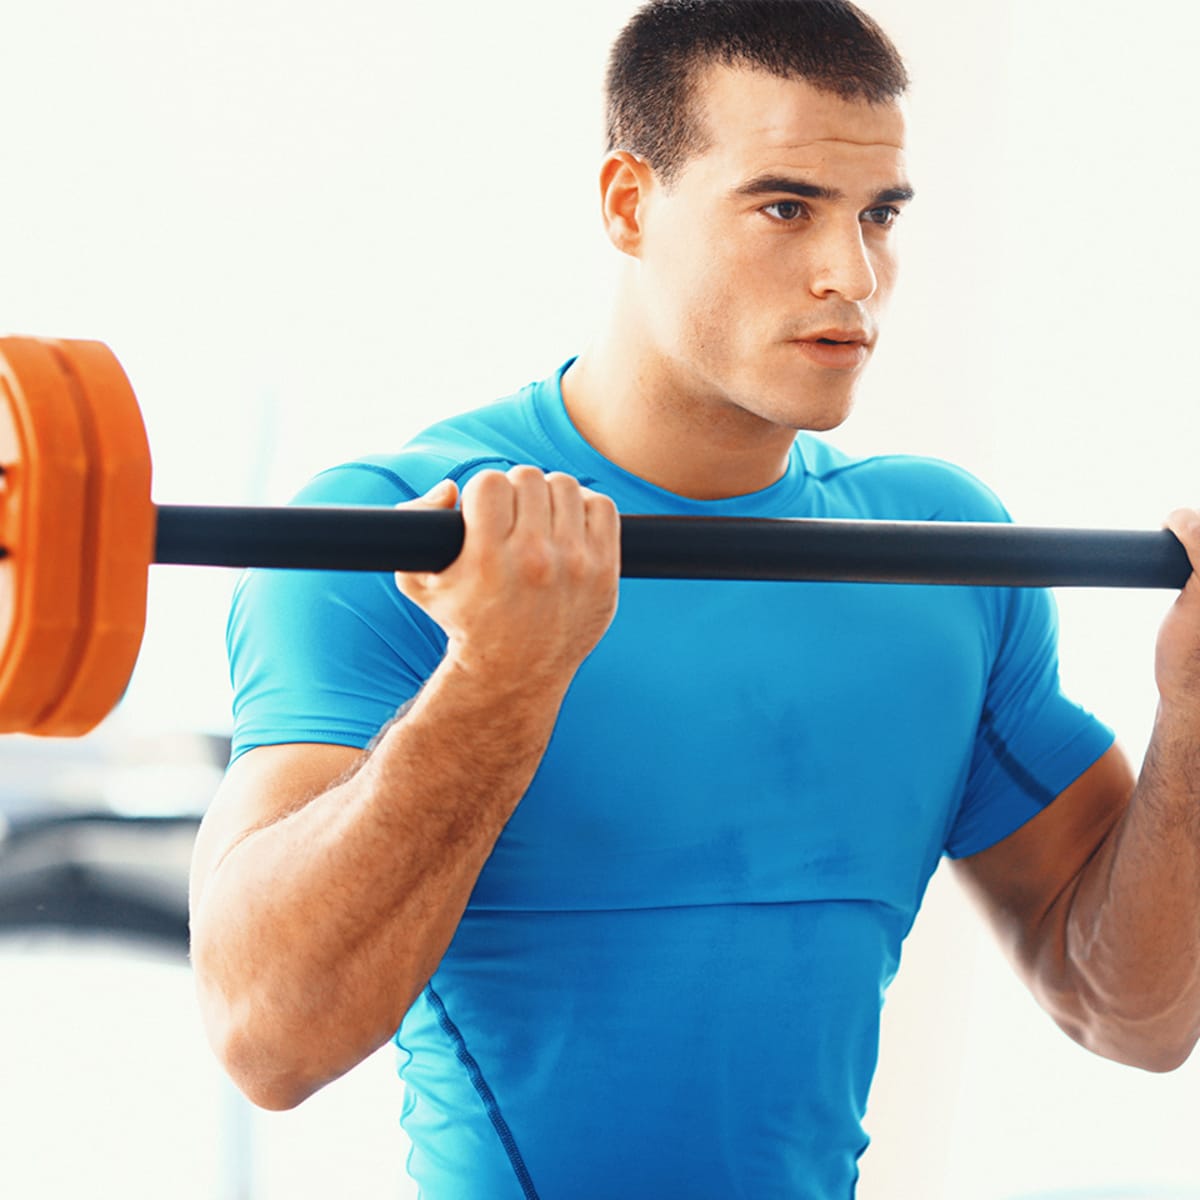 Get a Killer Bicep Workout at Home with These 16 Exercises